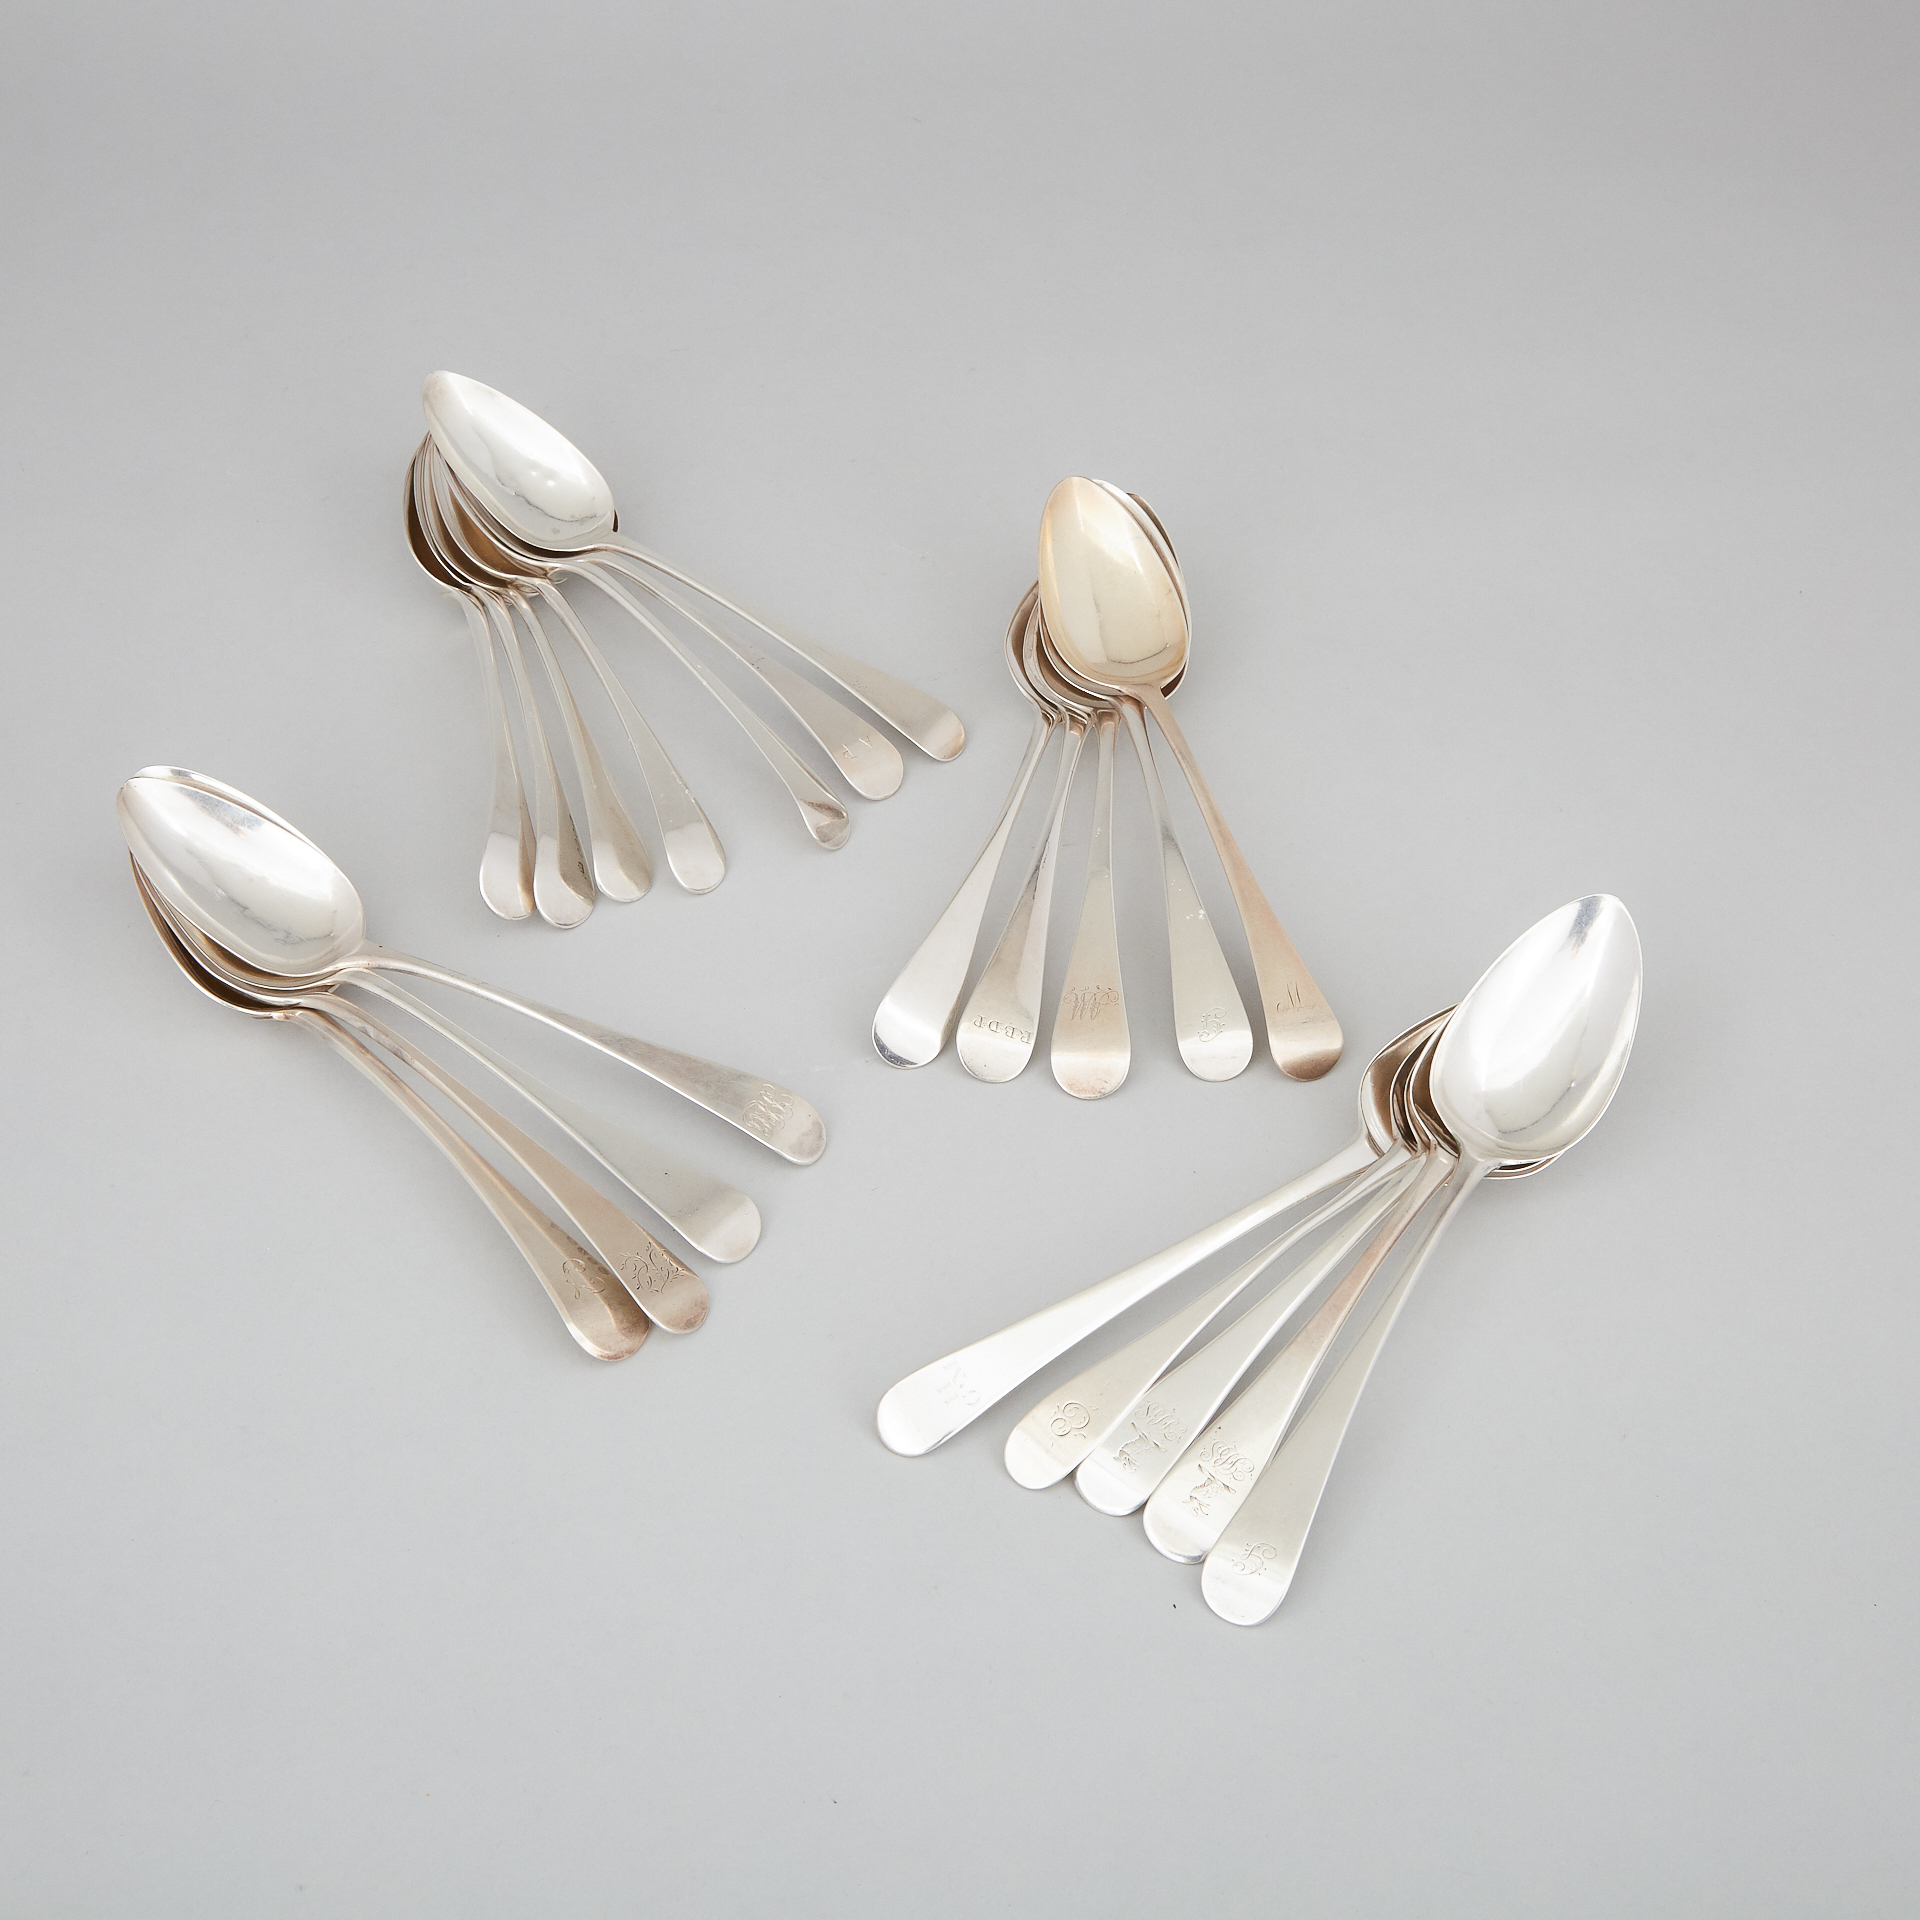 Twenty-One George III Silver Old English Pattern Table Spoons, mainly London, late 18th/early 19th century